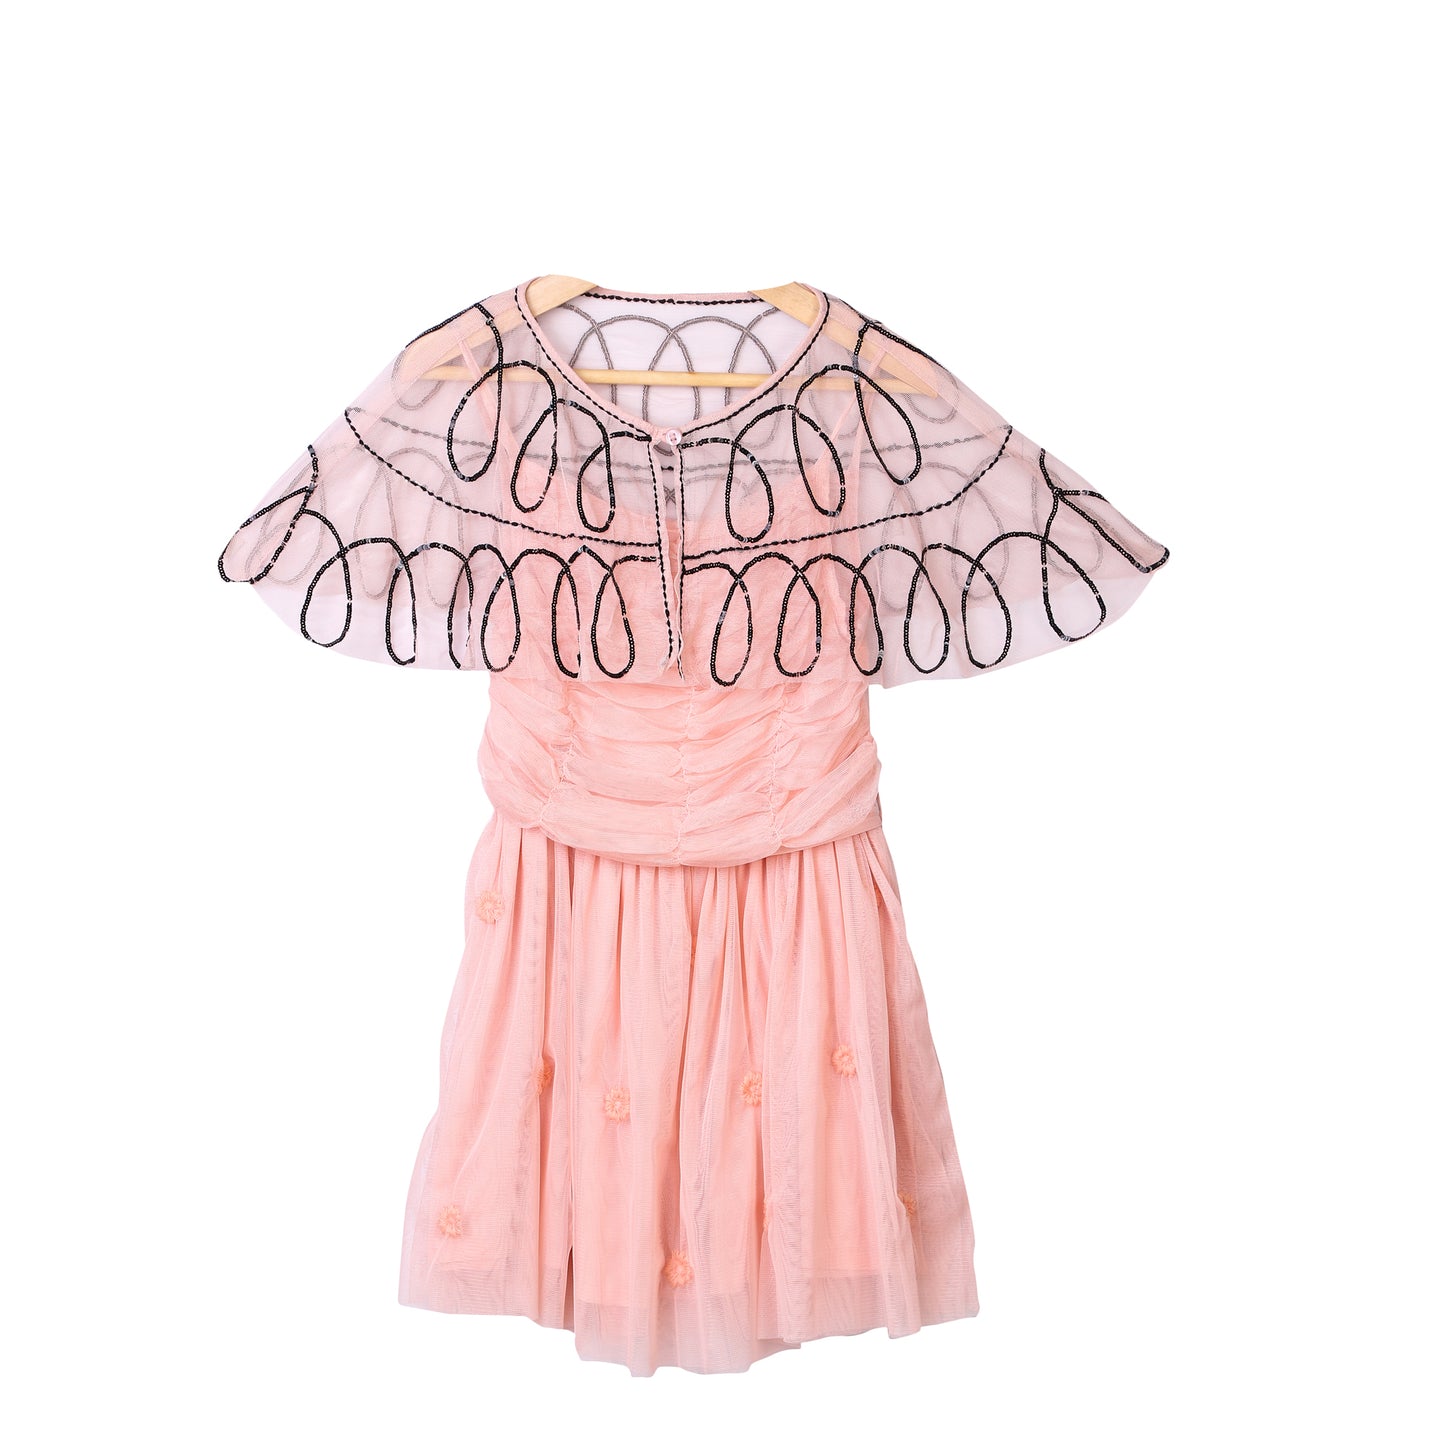 PINK PARTY DRESS WITH EMBELLISHMENTS ON A NETTED CAPE     (LEAD TIME 15-20 DAYS)